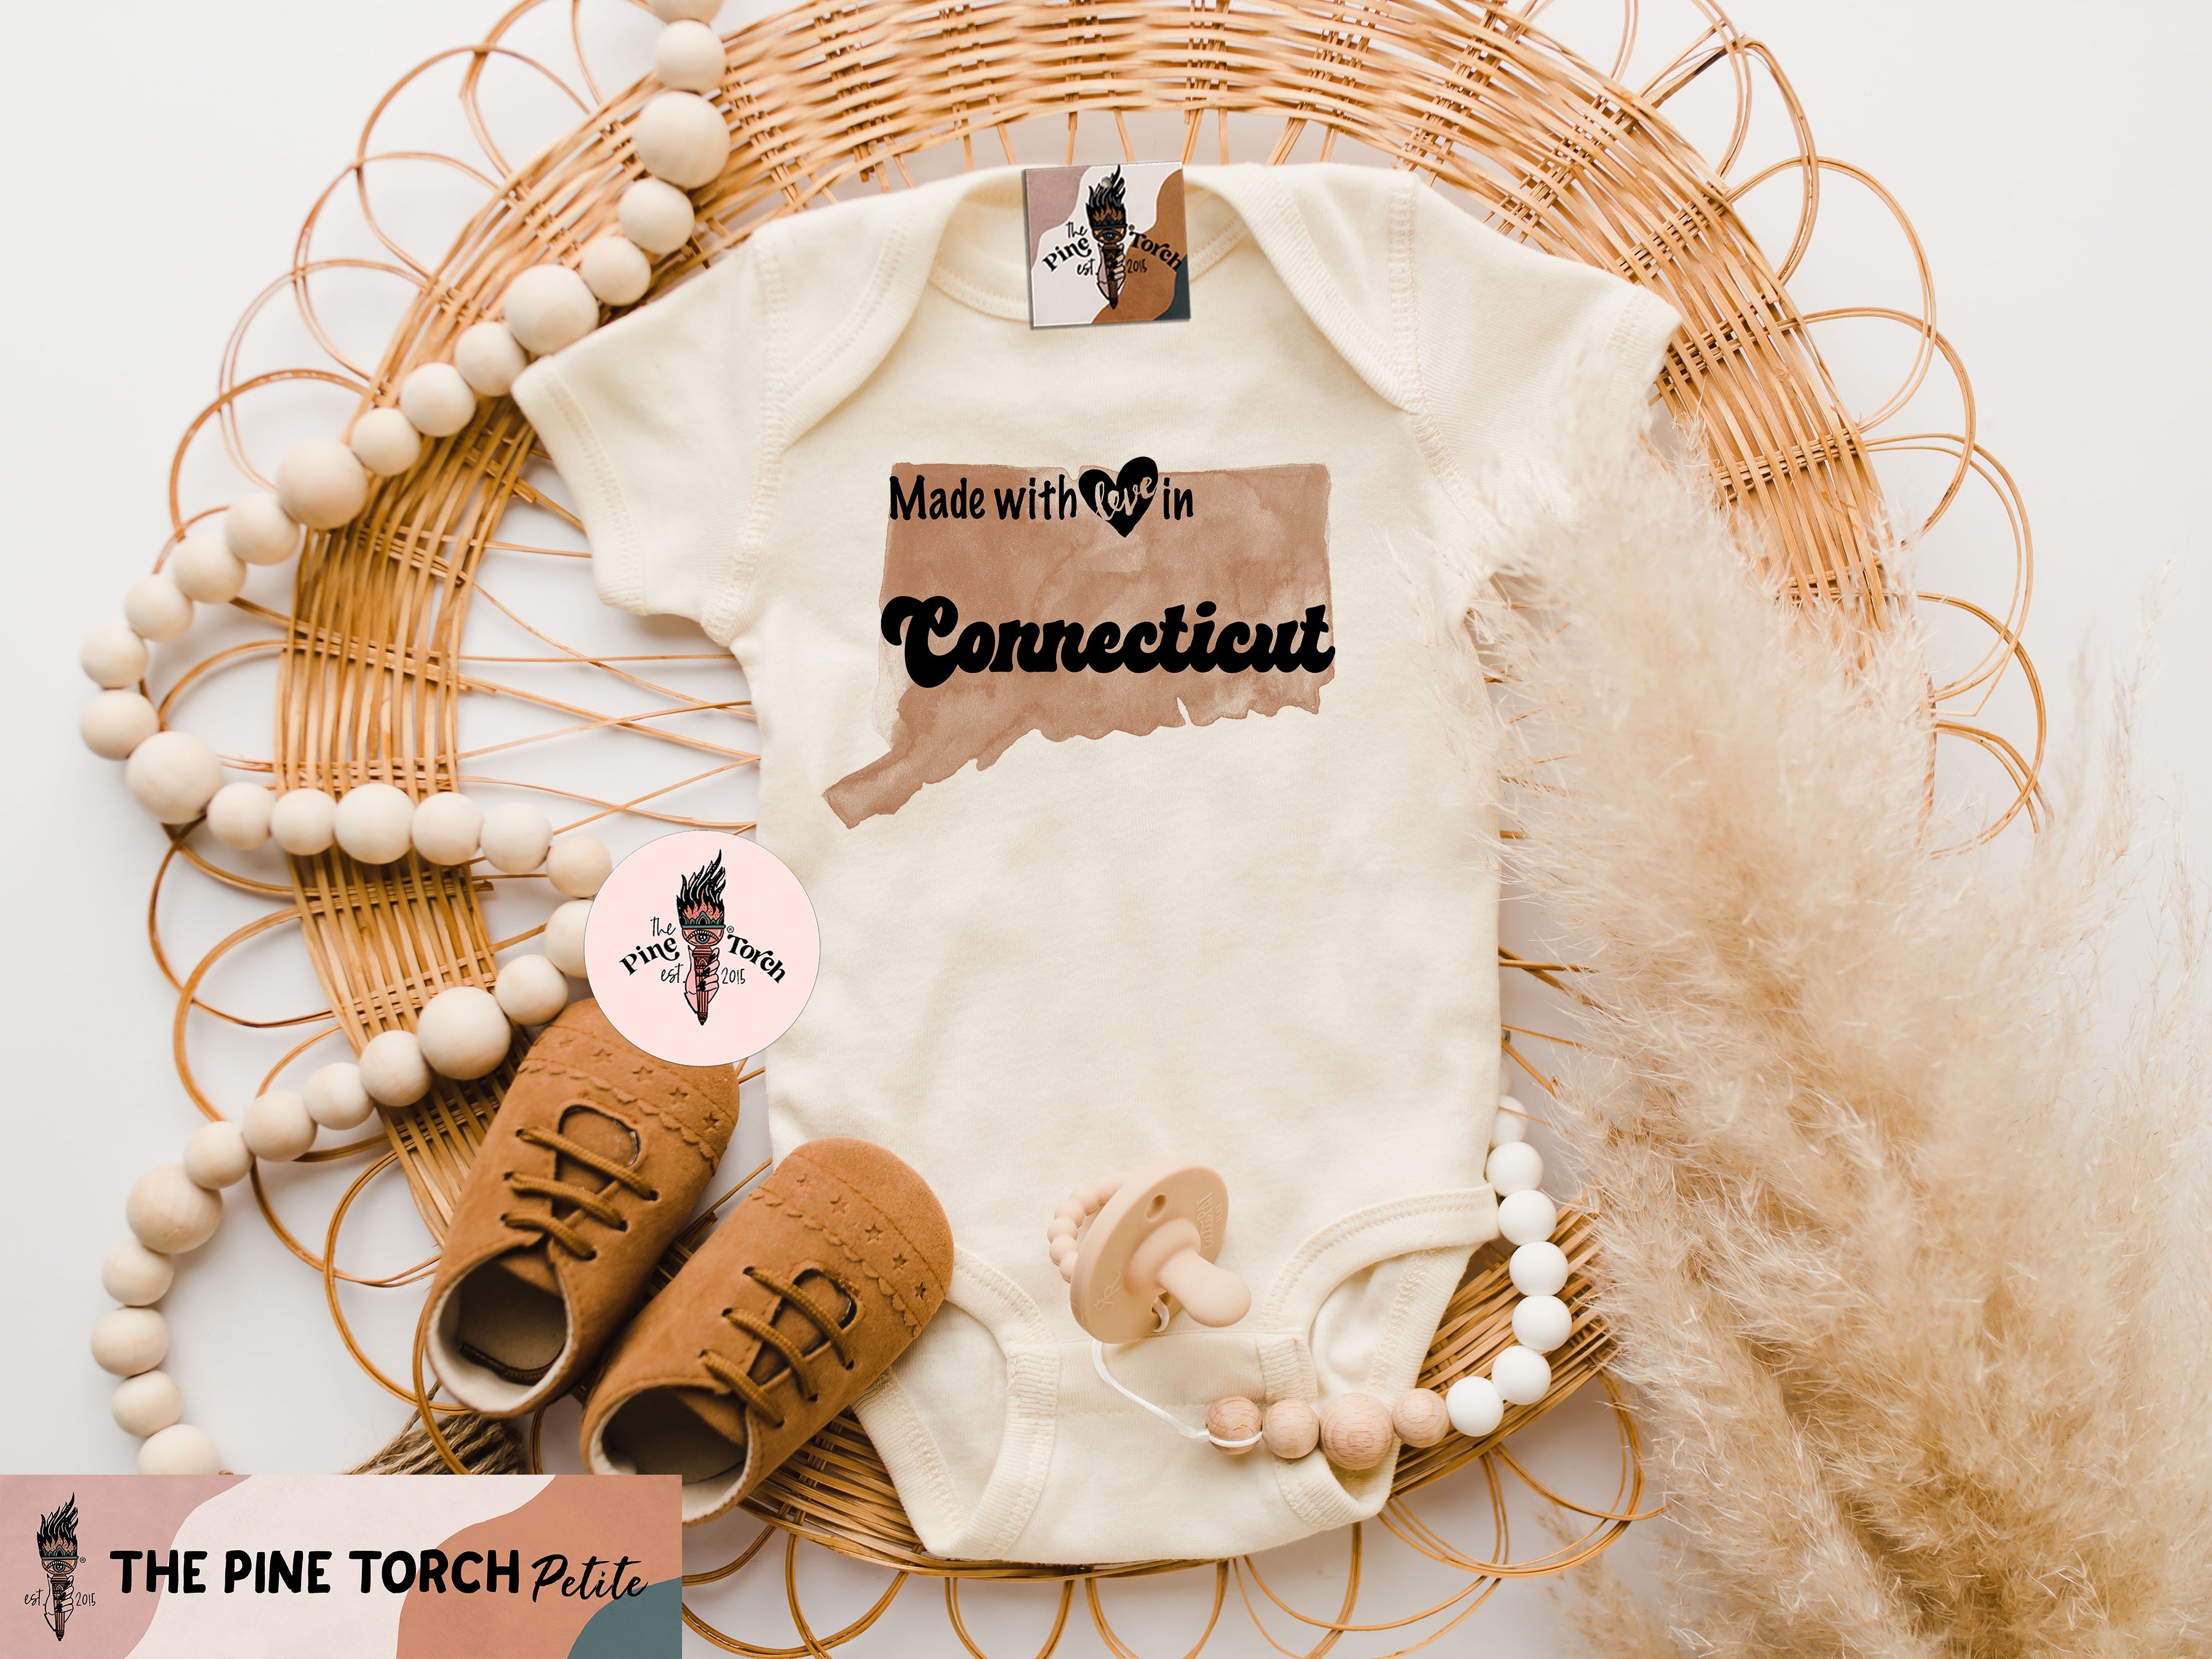 « MADE WITH LOVE IN CONNECTICUT » BODYSUIT